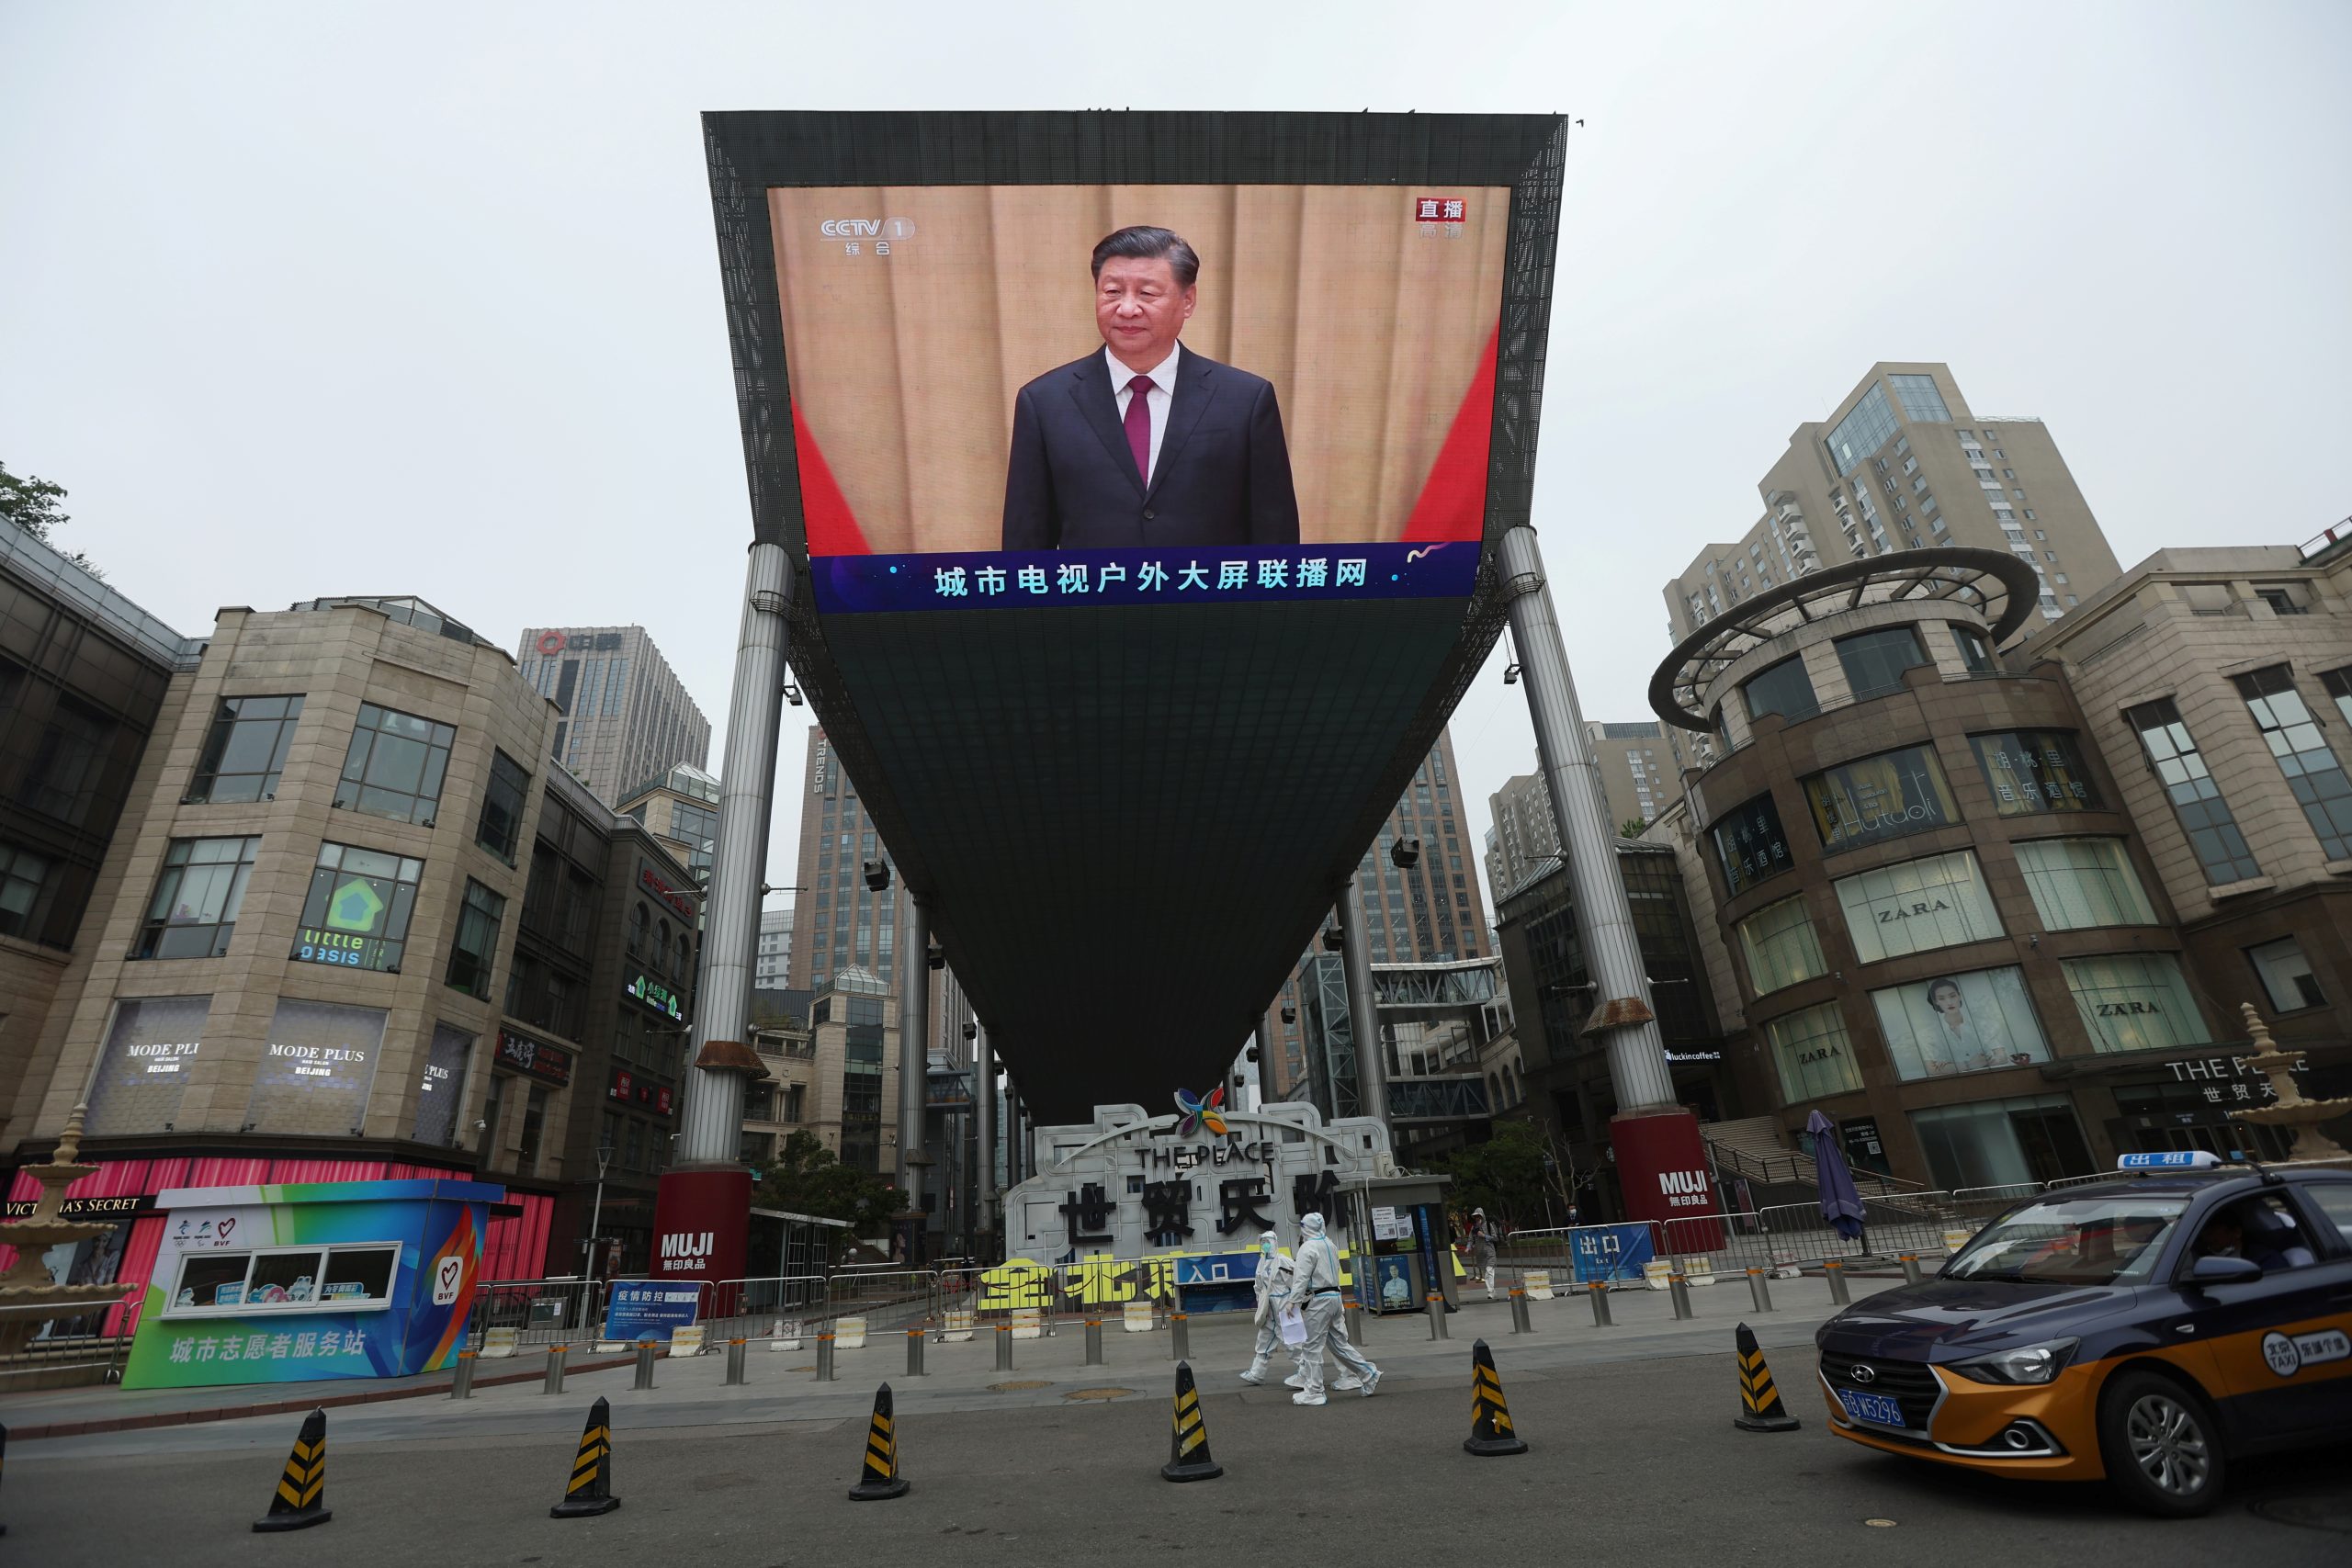 President Xi's damage control focuses on Europe and the Chinese